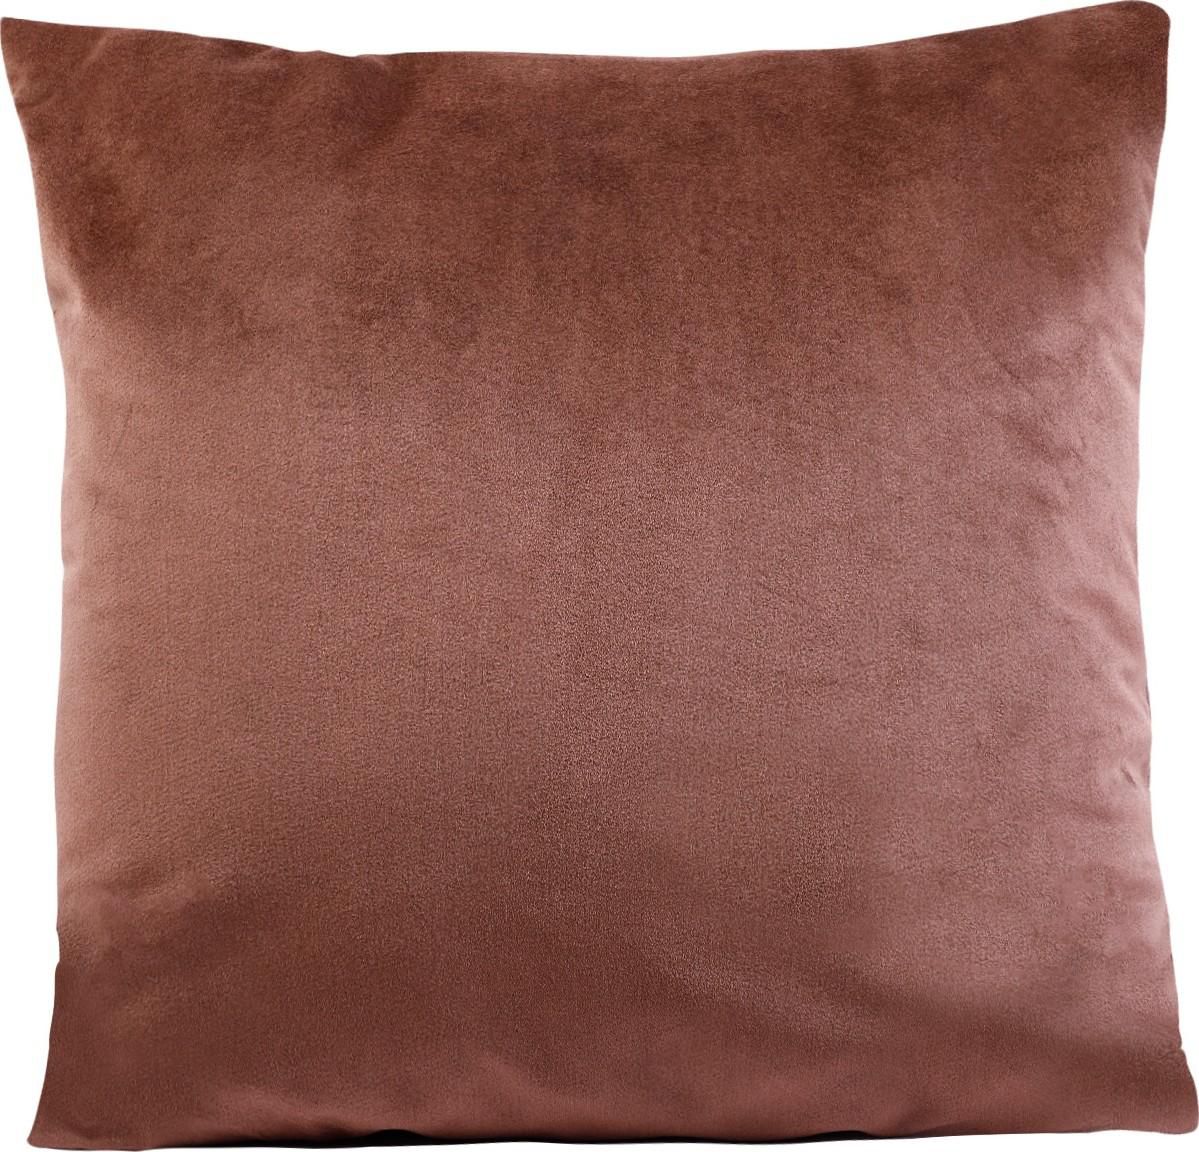 PARRY LIFE Decorative Velvet Cushion Pillow - Decorative Square Pillow Case - Ideal Pillow for Livingroom Sofa Couch Bedroom Car, 44cmx44cm - Square Cushion Pillow, Perfect to Match any Home Dcor-BROW